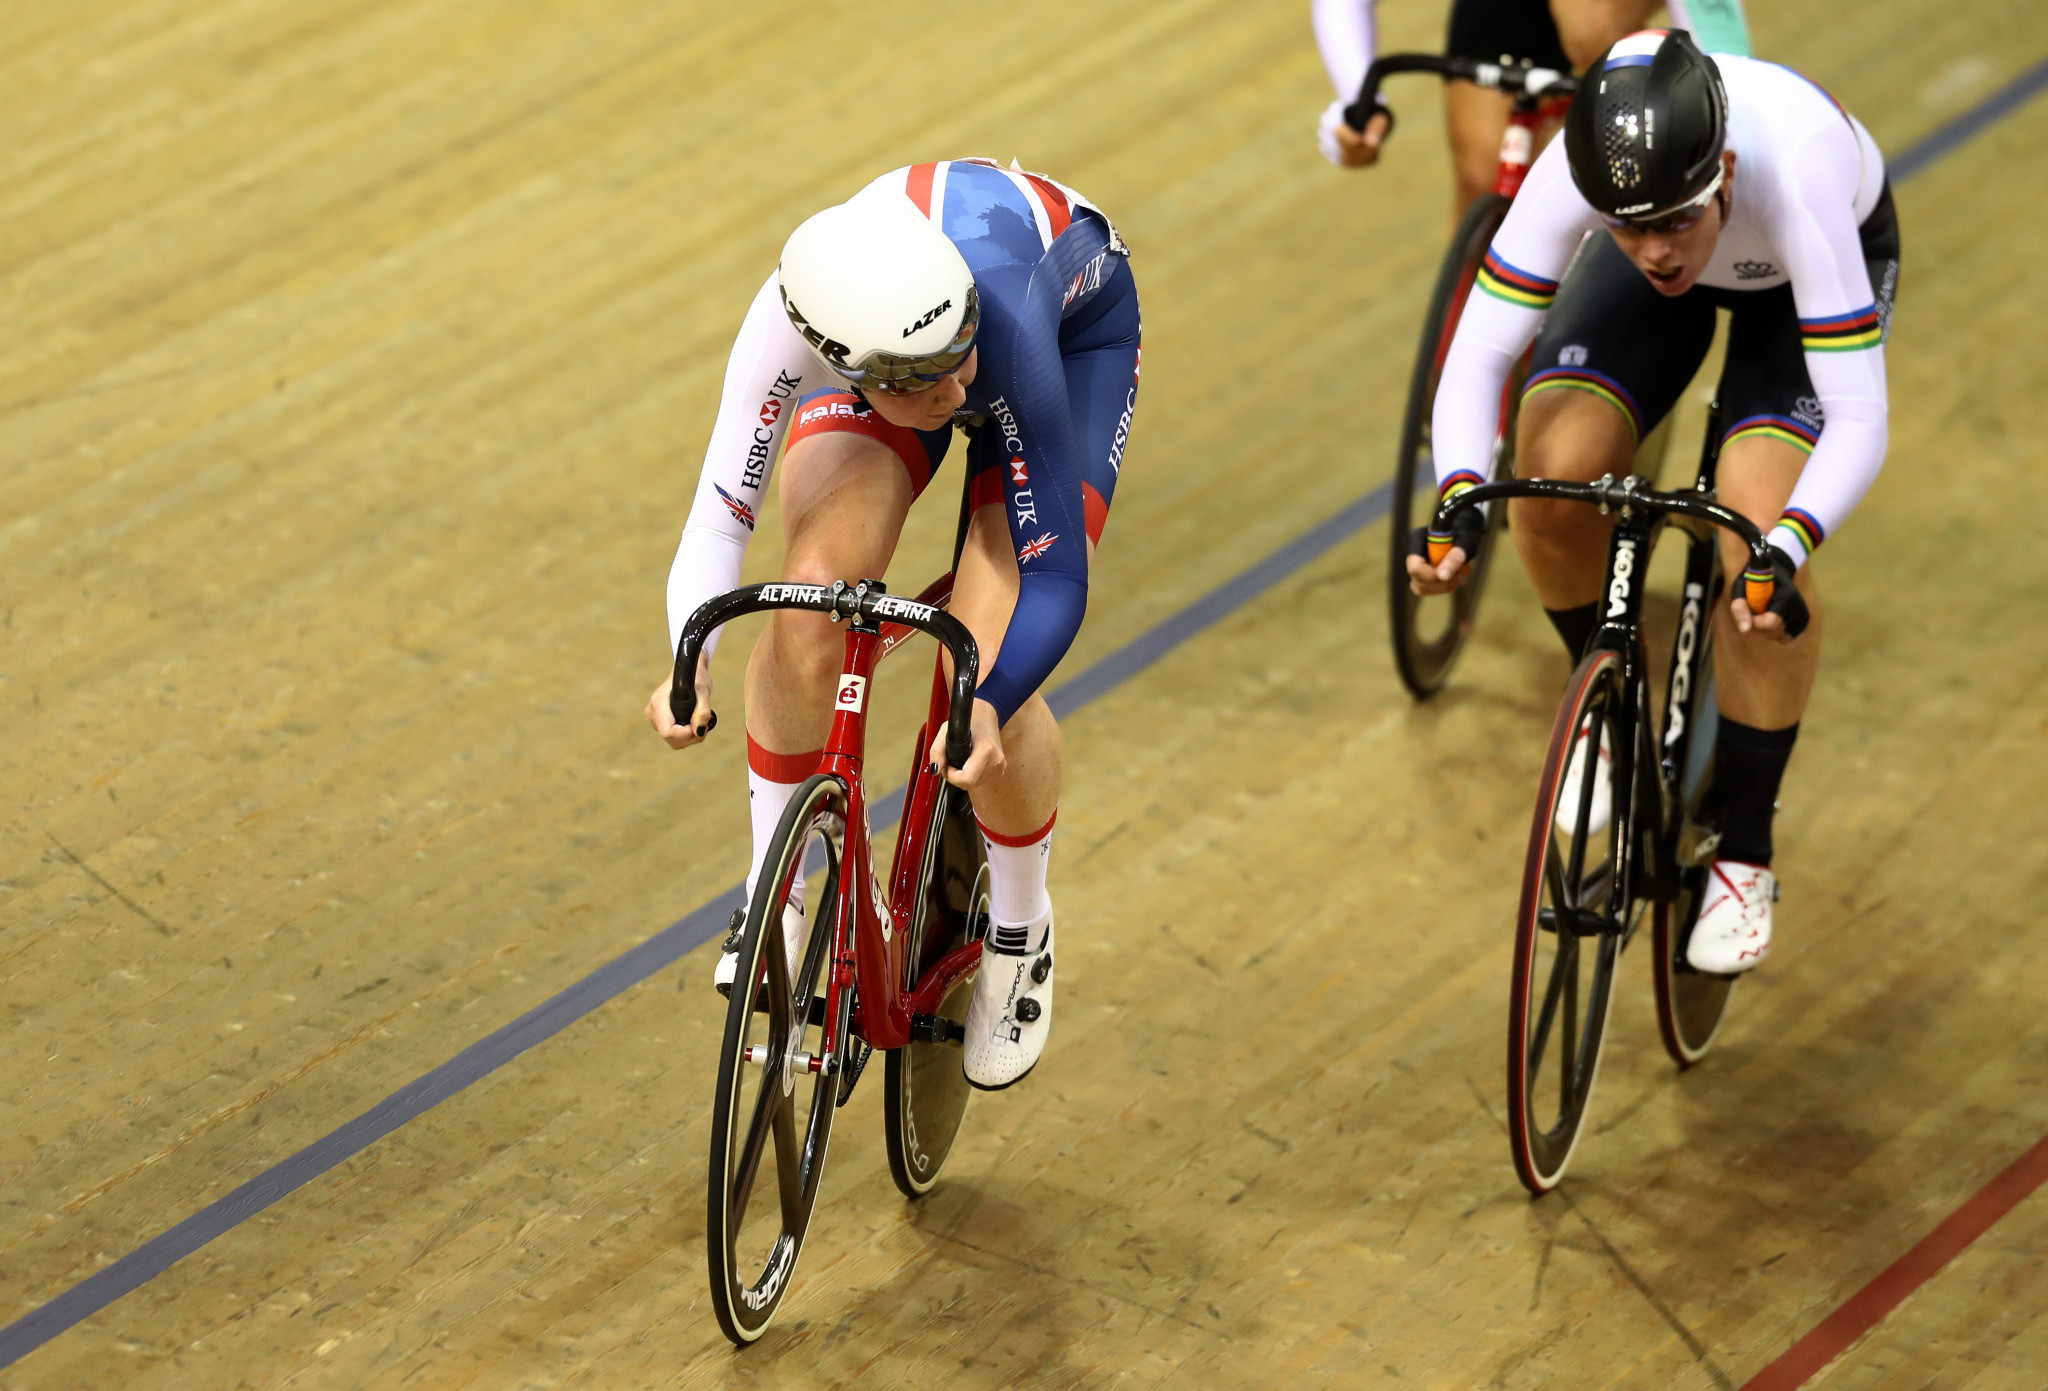 Britain's Katie Archibald picked up a second gold at the UCI Track World Cup in Berlin ©Getty Images